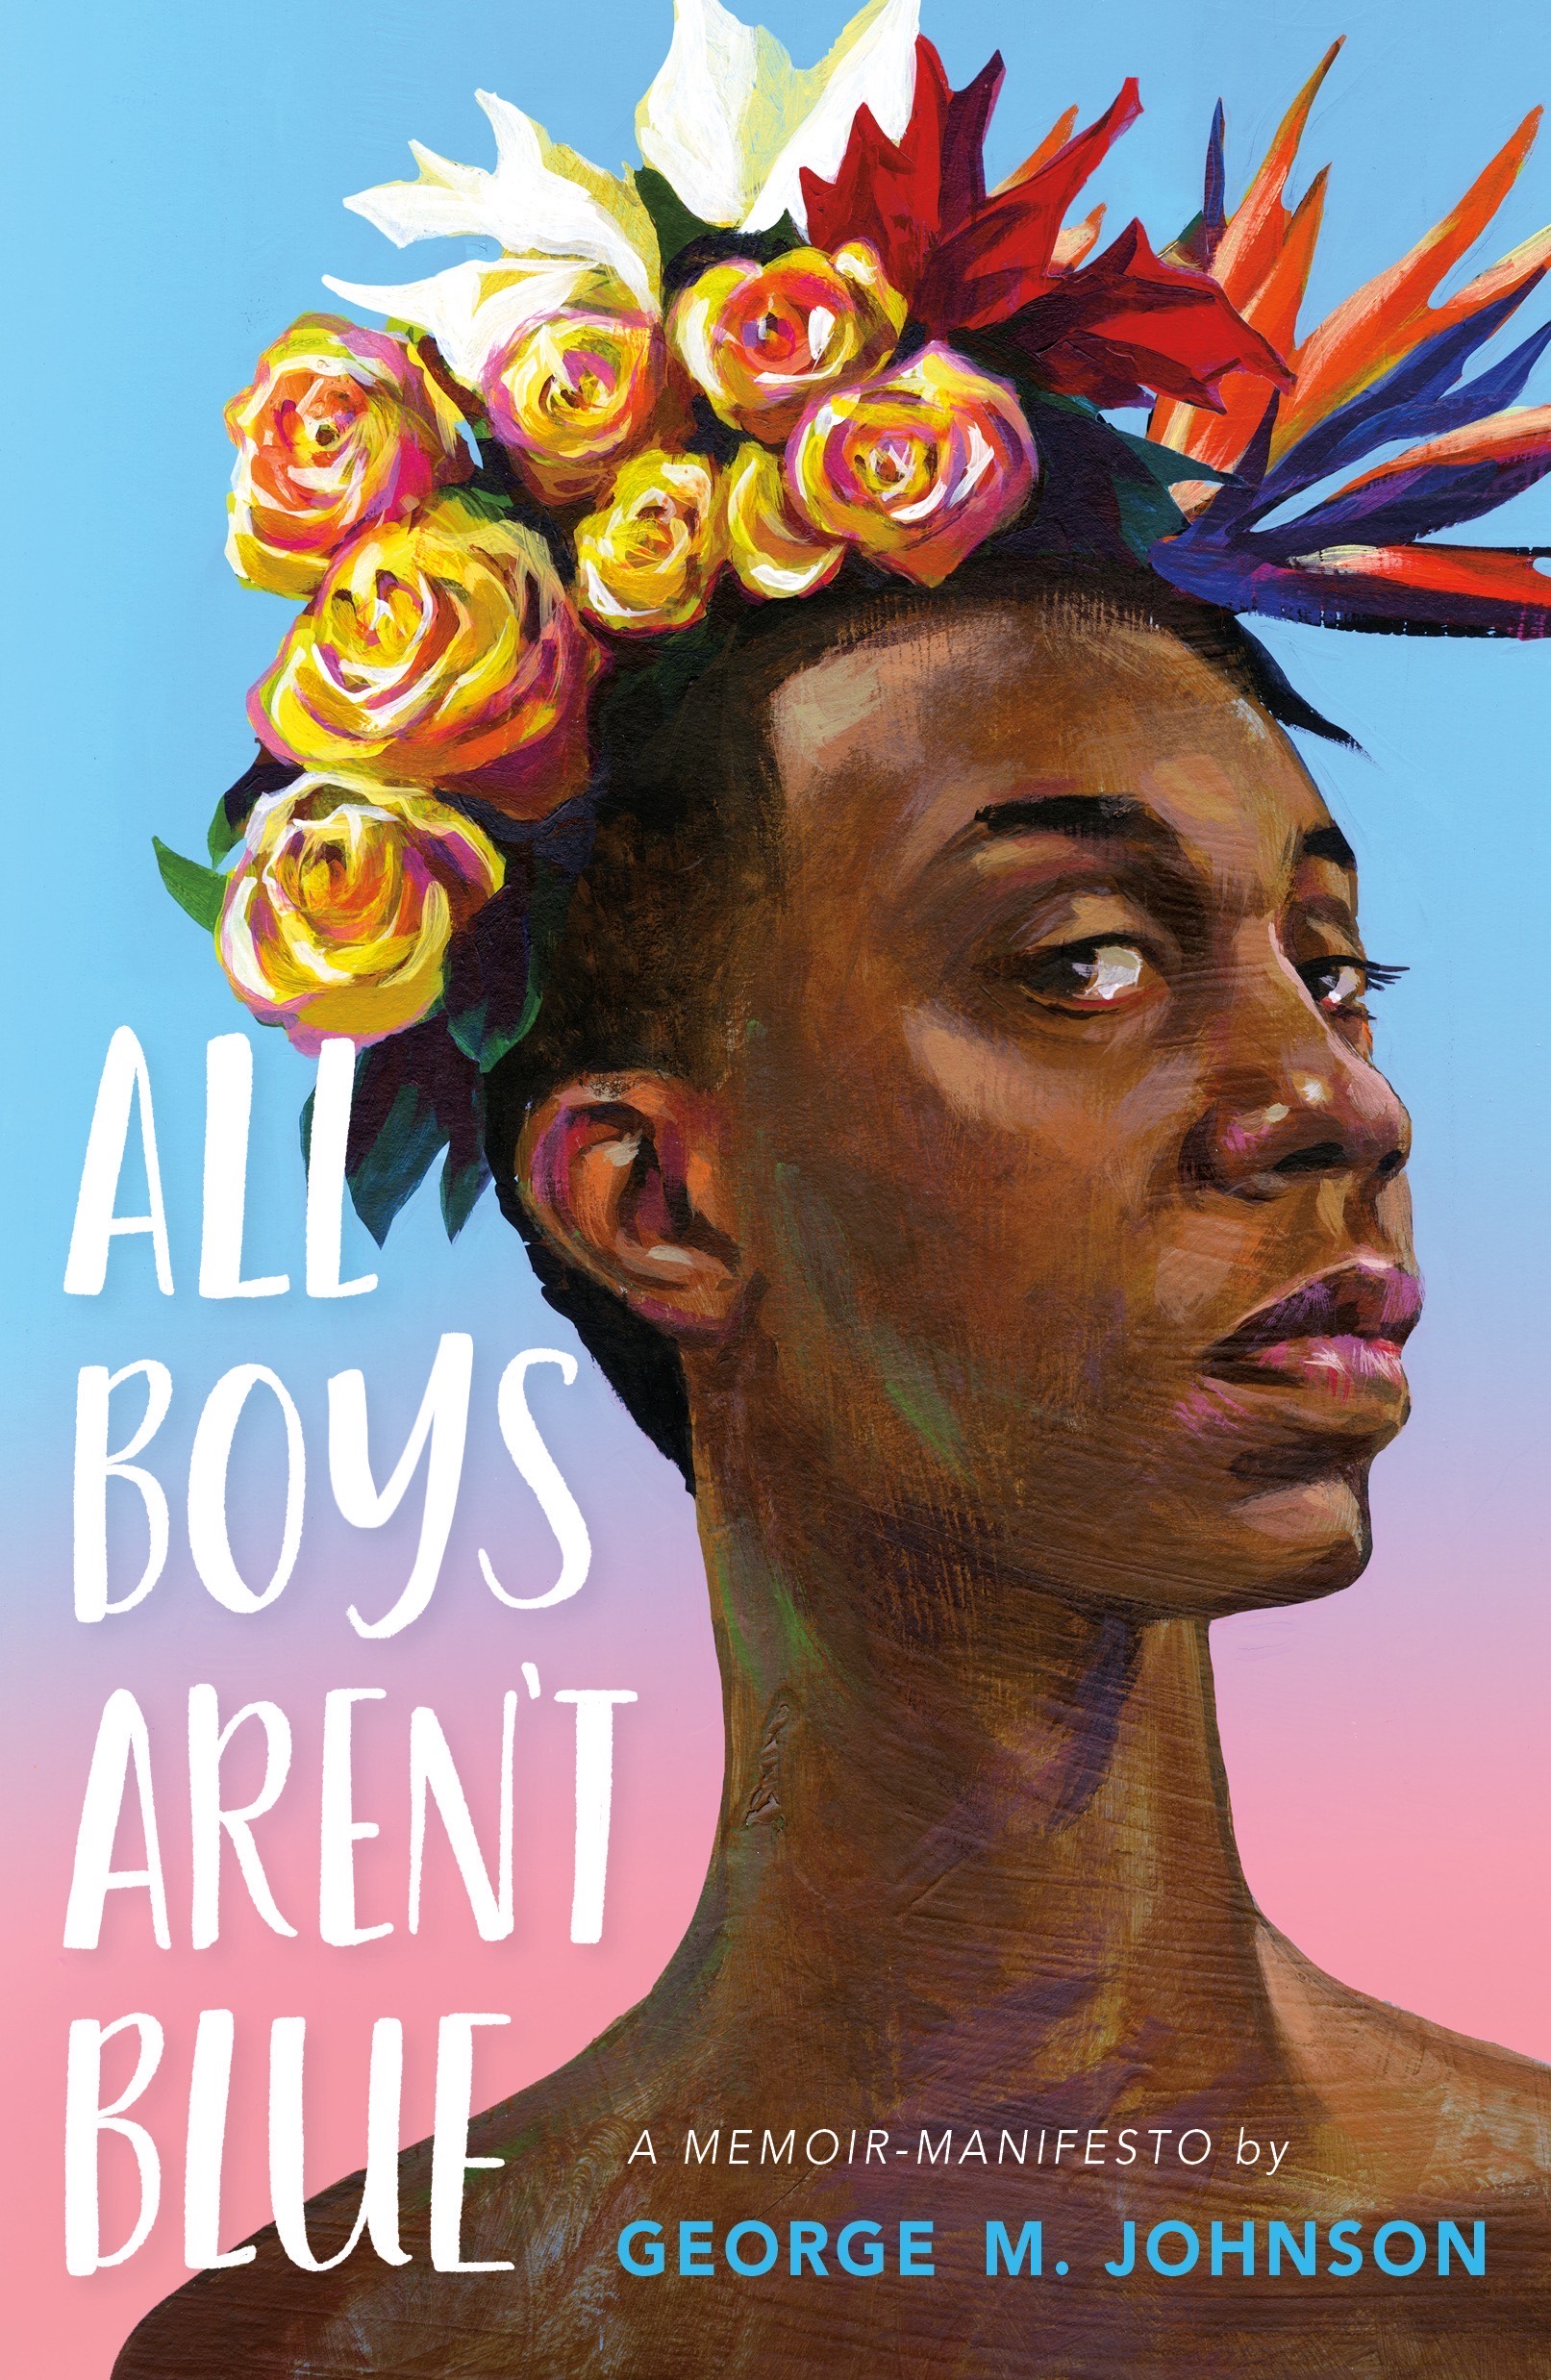 Cover of George M. Johnson's "All Boys Aren’t Blue"